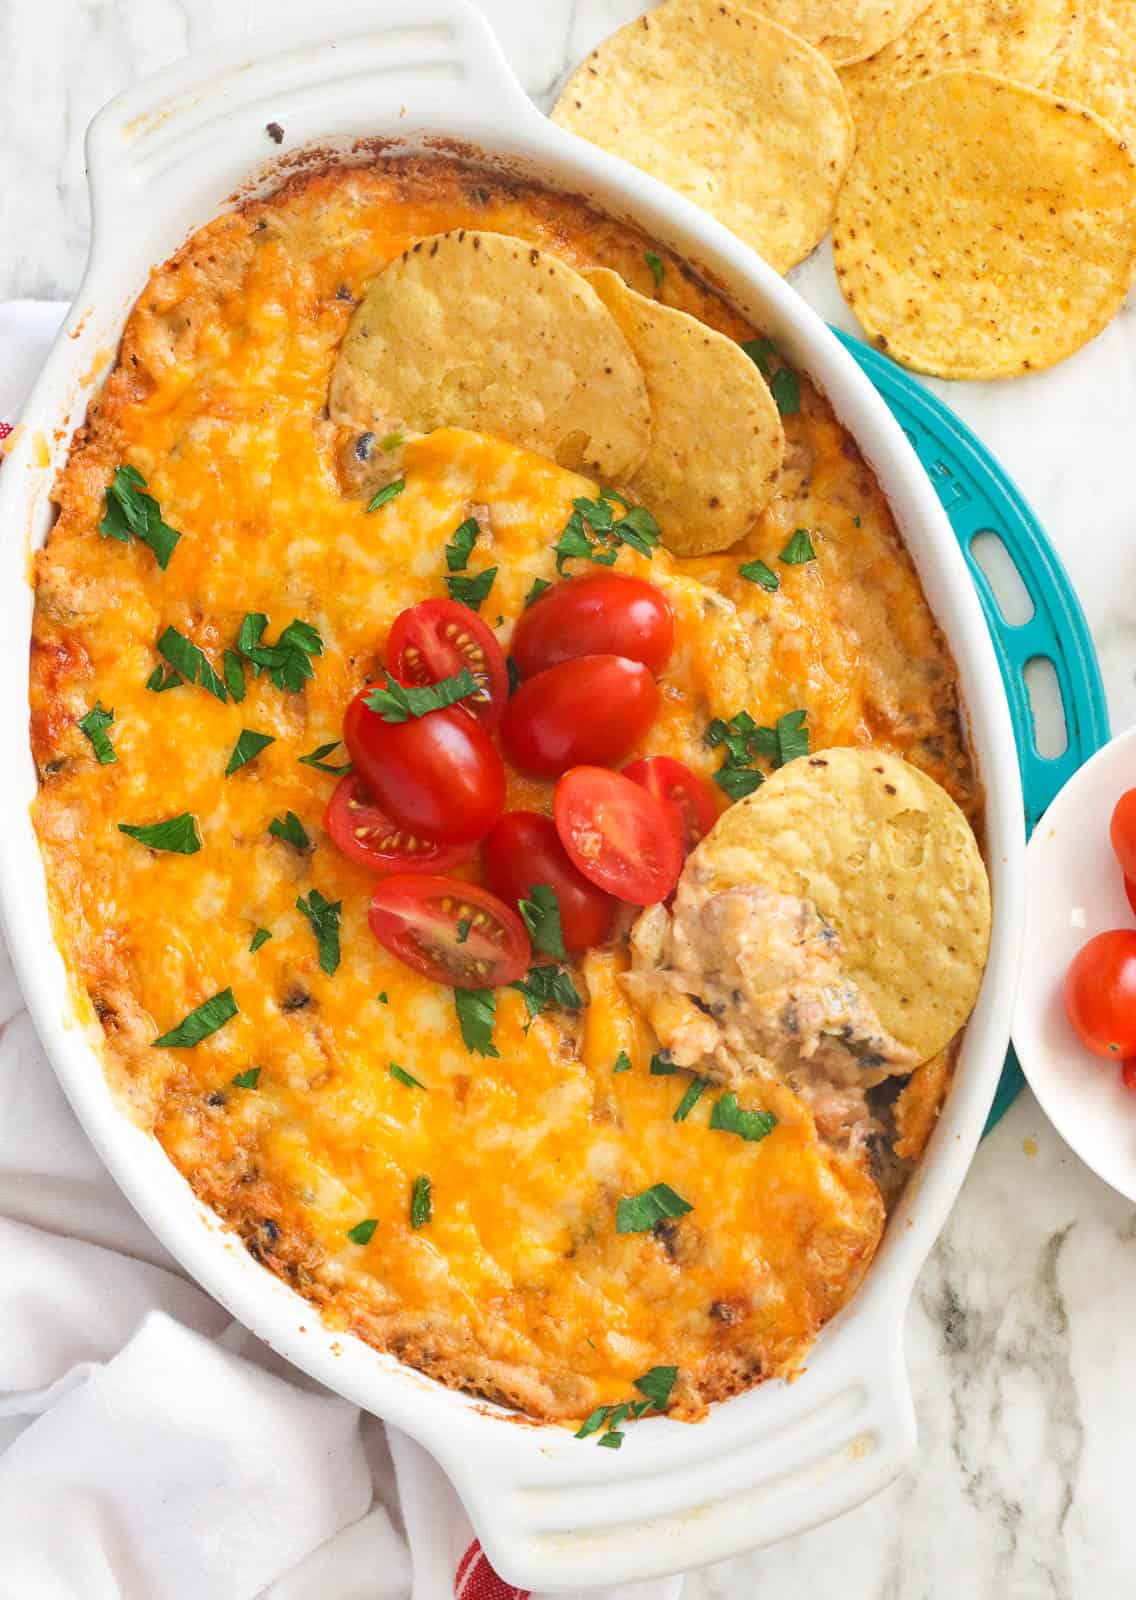 Black-Eyed Pea Dip – Savory, spicy, creamy, and bubbling with hot cheese